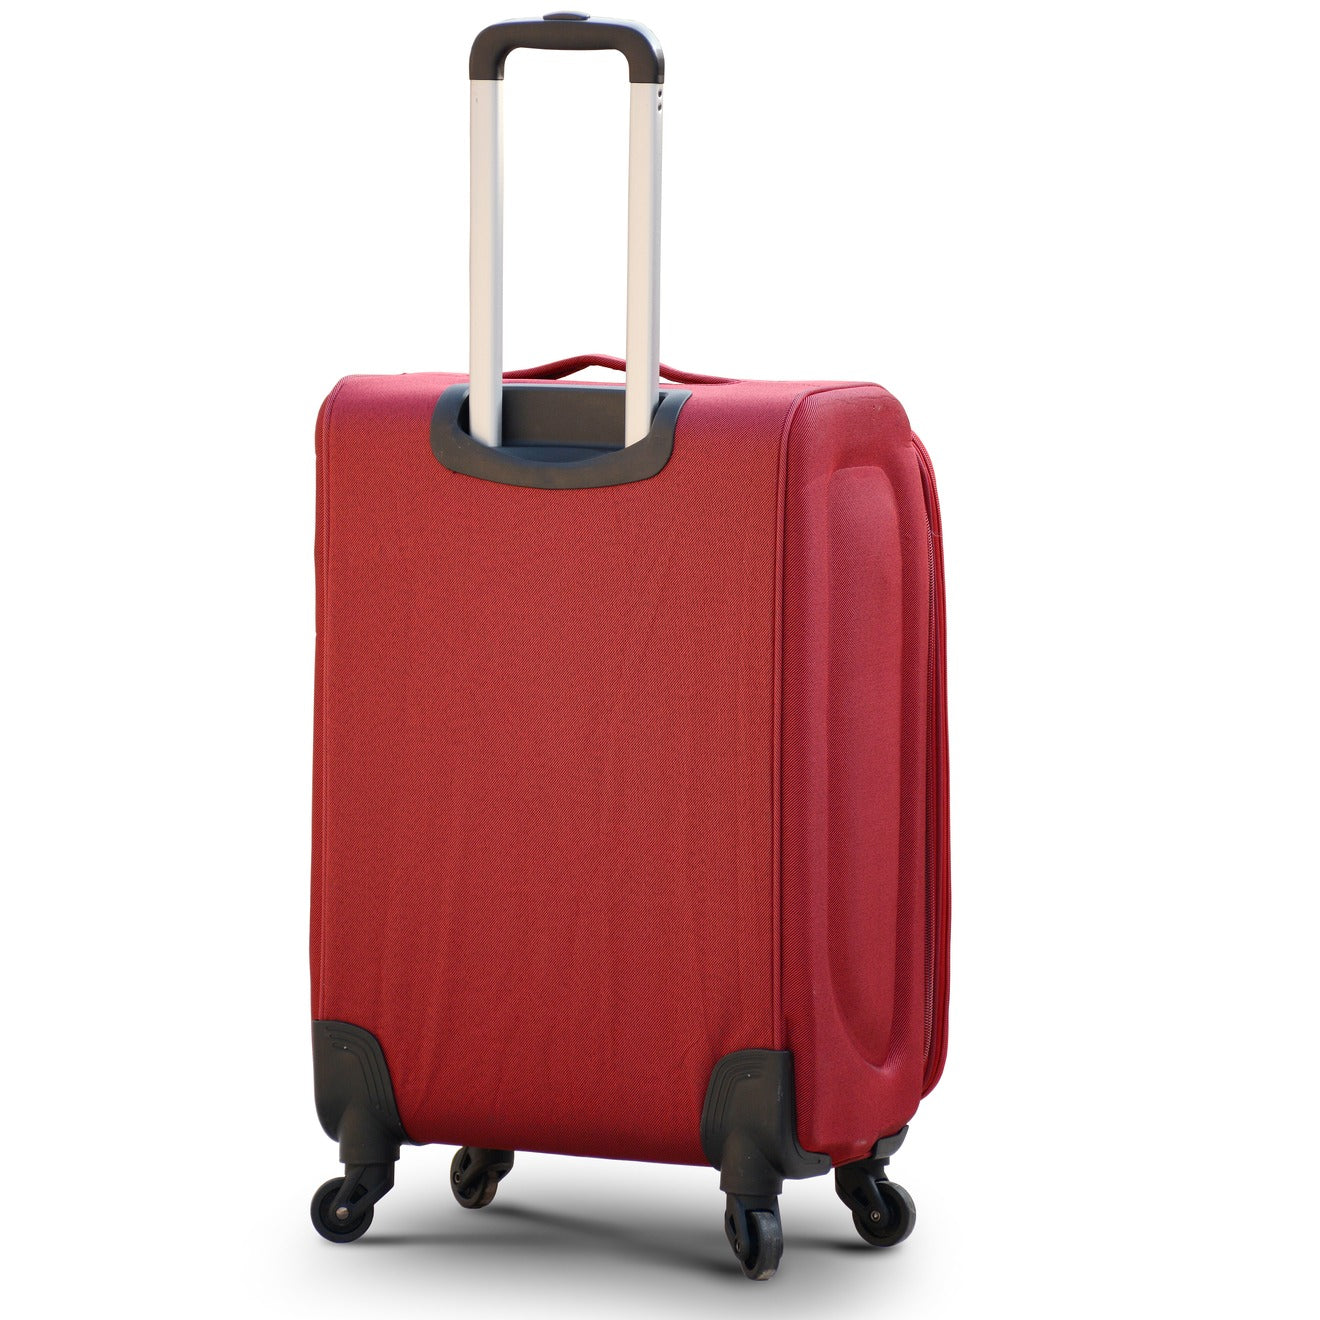 Soft Material Luggage | Soft Shell | Lightweight |  10 Kg - 20 Inches 4 Wheels | 2 Years Warranty | Jian 4 Wheel Red